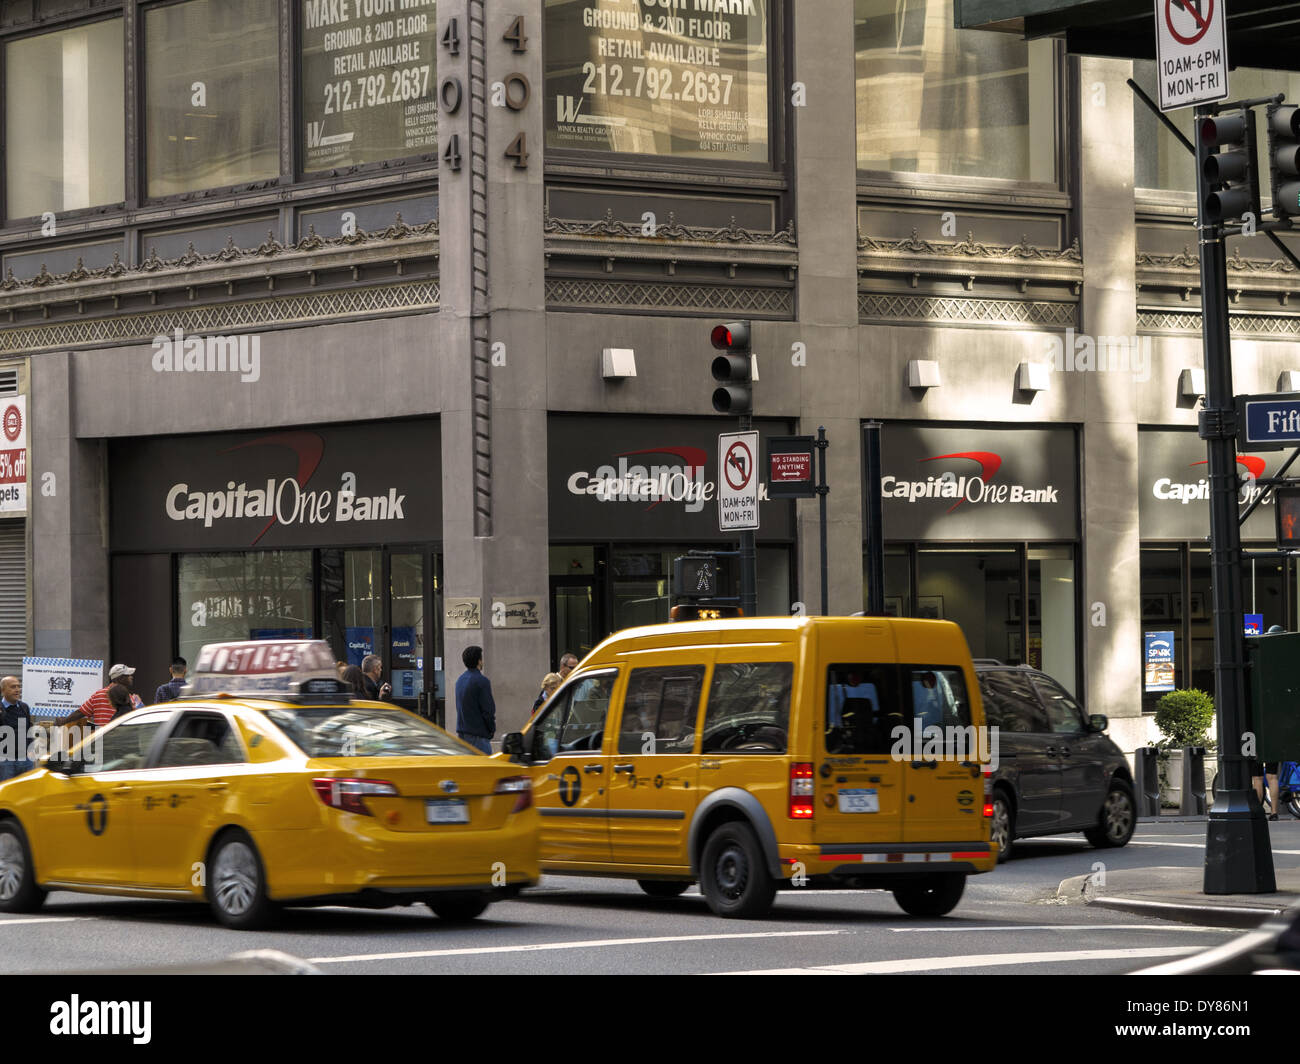 Capital One Bank and yellow taxi cab Fifth Avenue New York USA Stock Photo